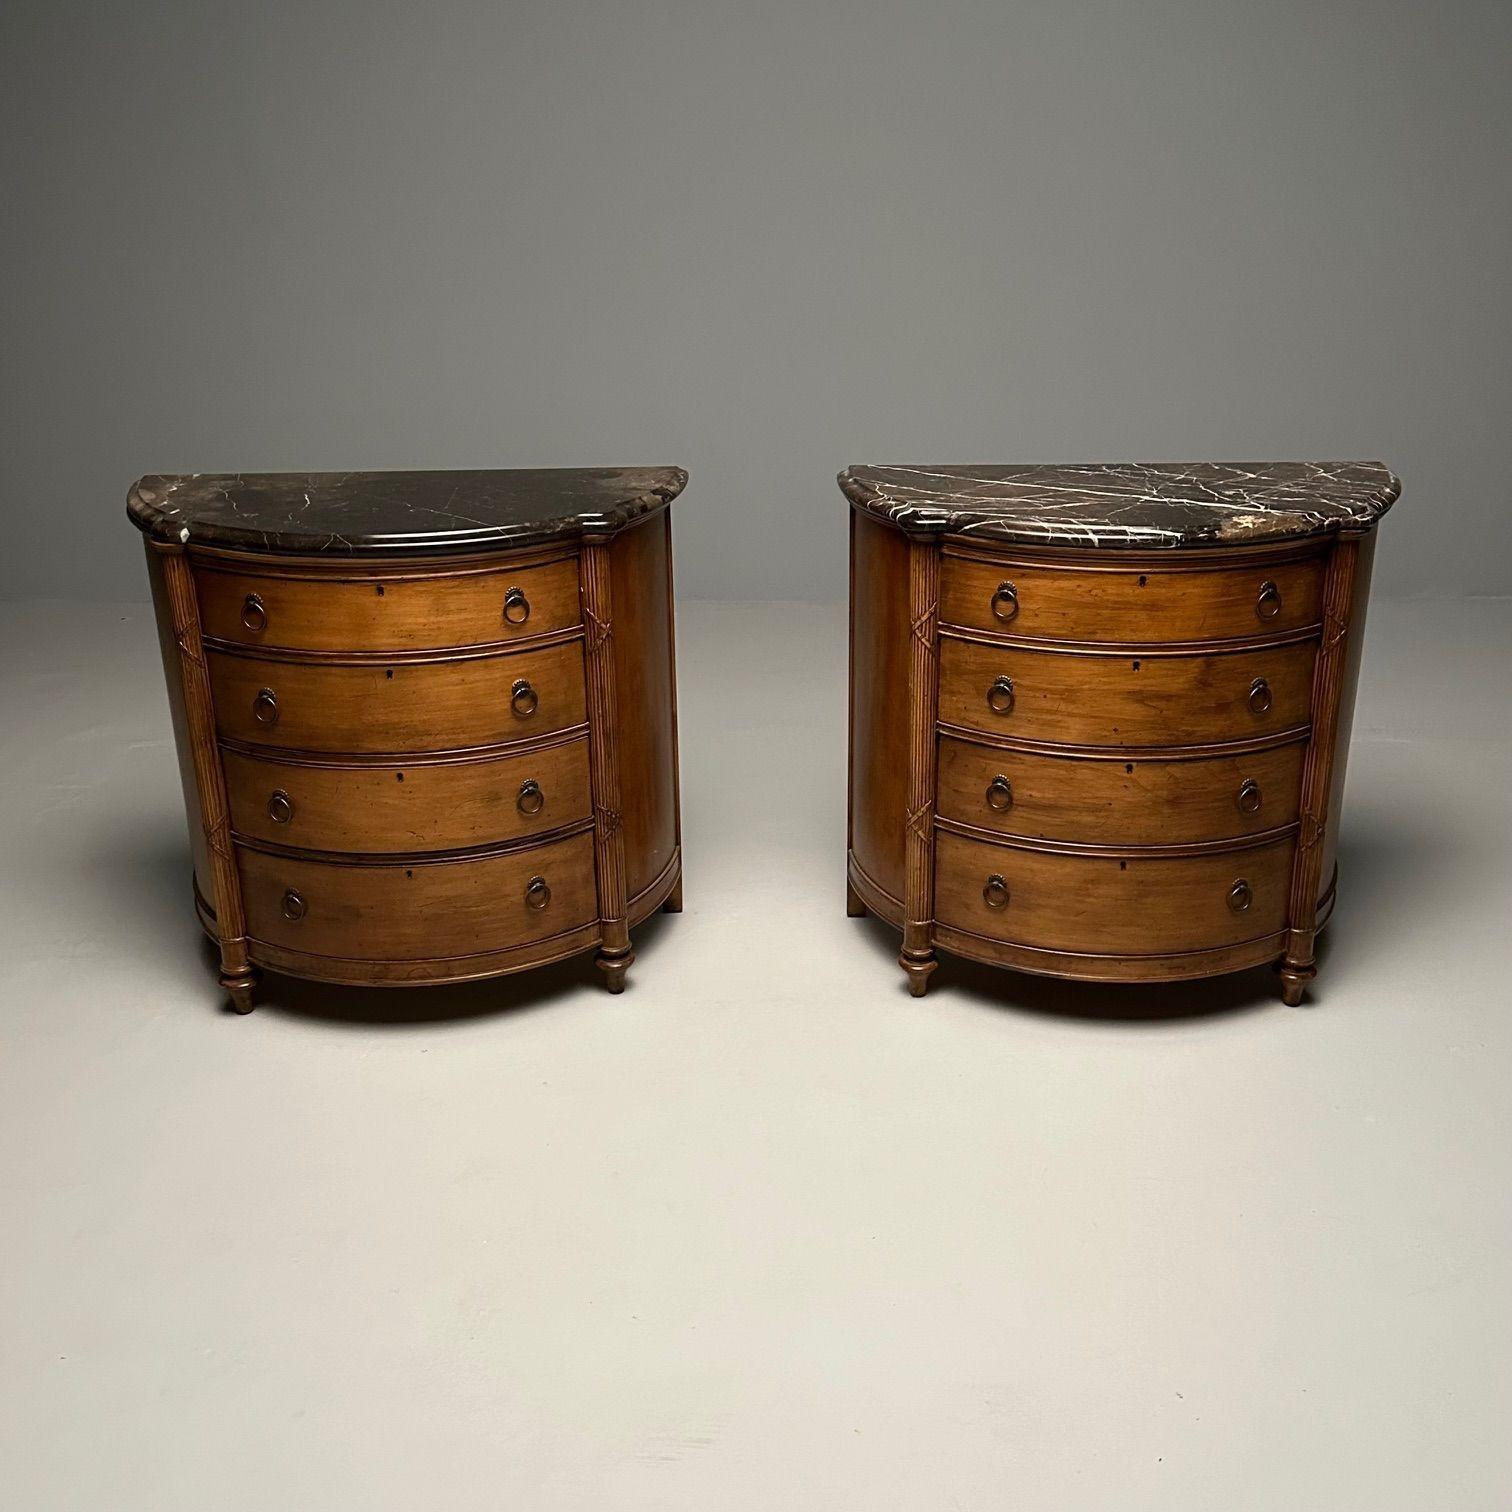 Granite Pair of Regency Style Demilune Commodes / Cabinet, Marble Top, Walnut